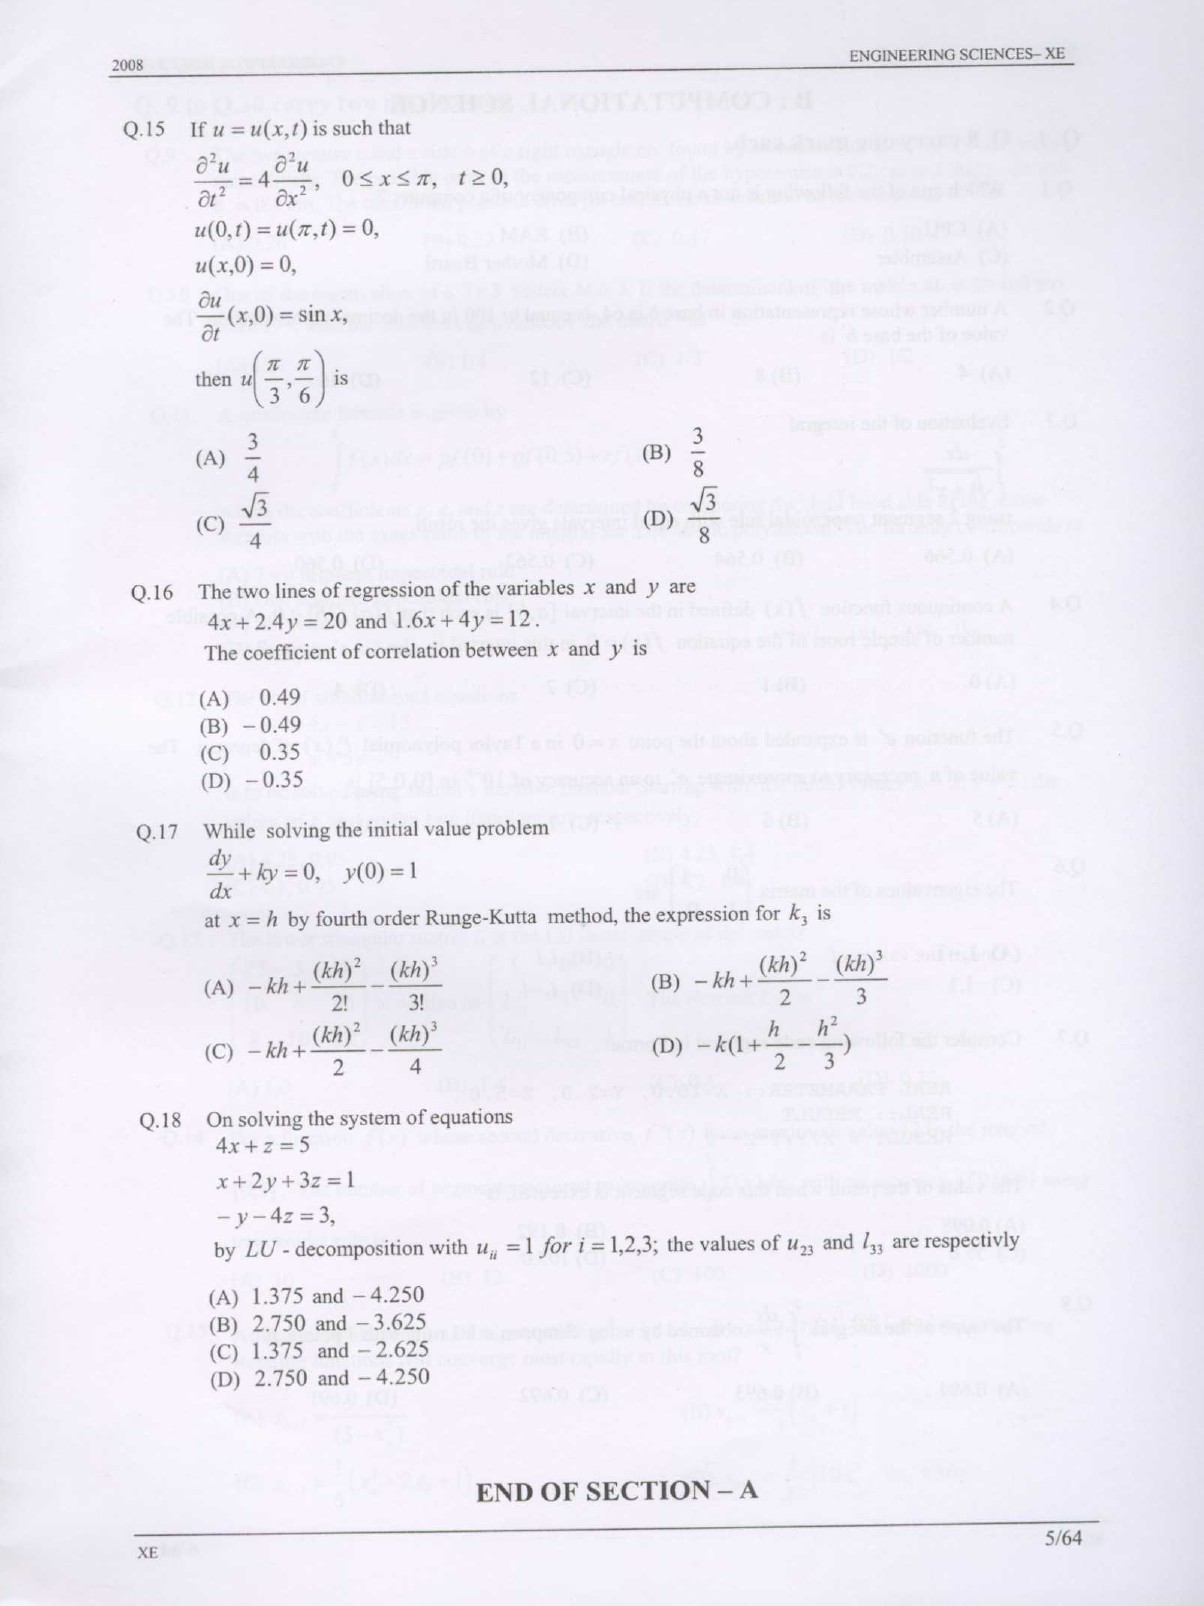 GATE Exam Question Paper 2008 Engineering Sciences 5